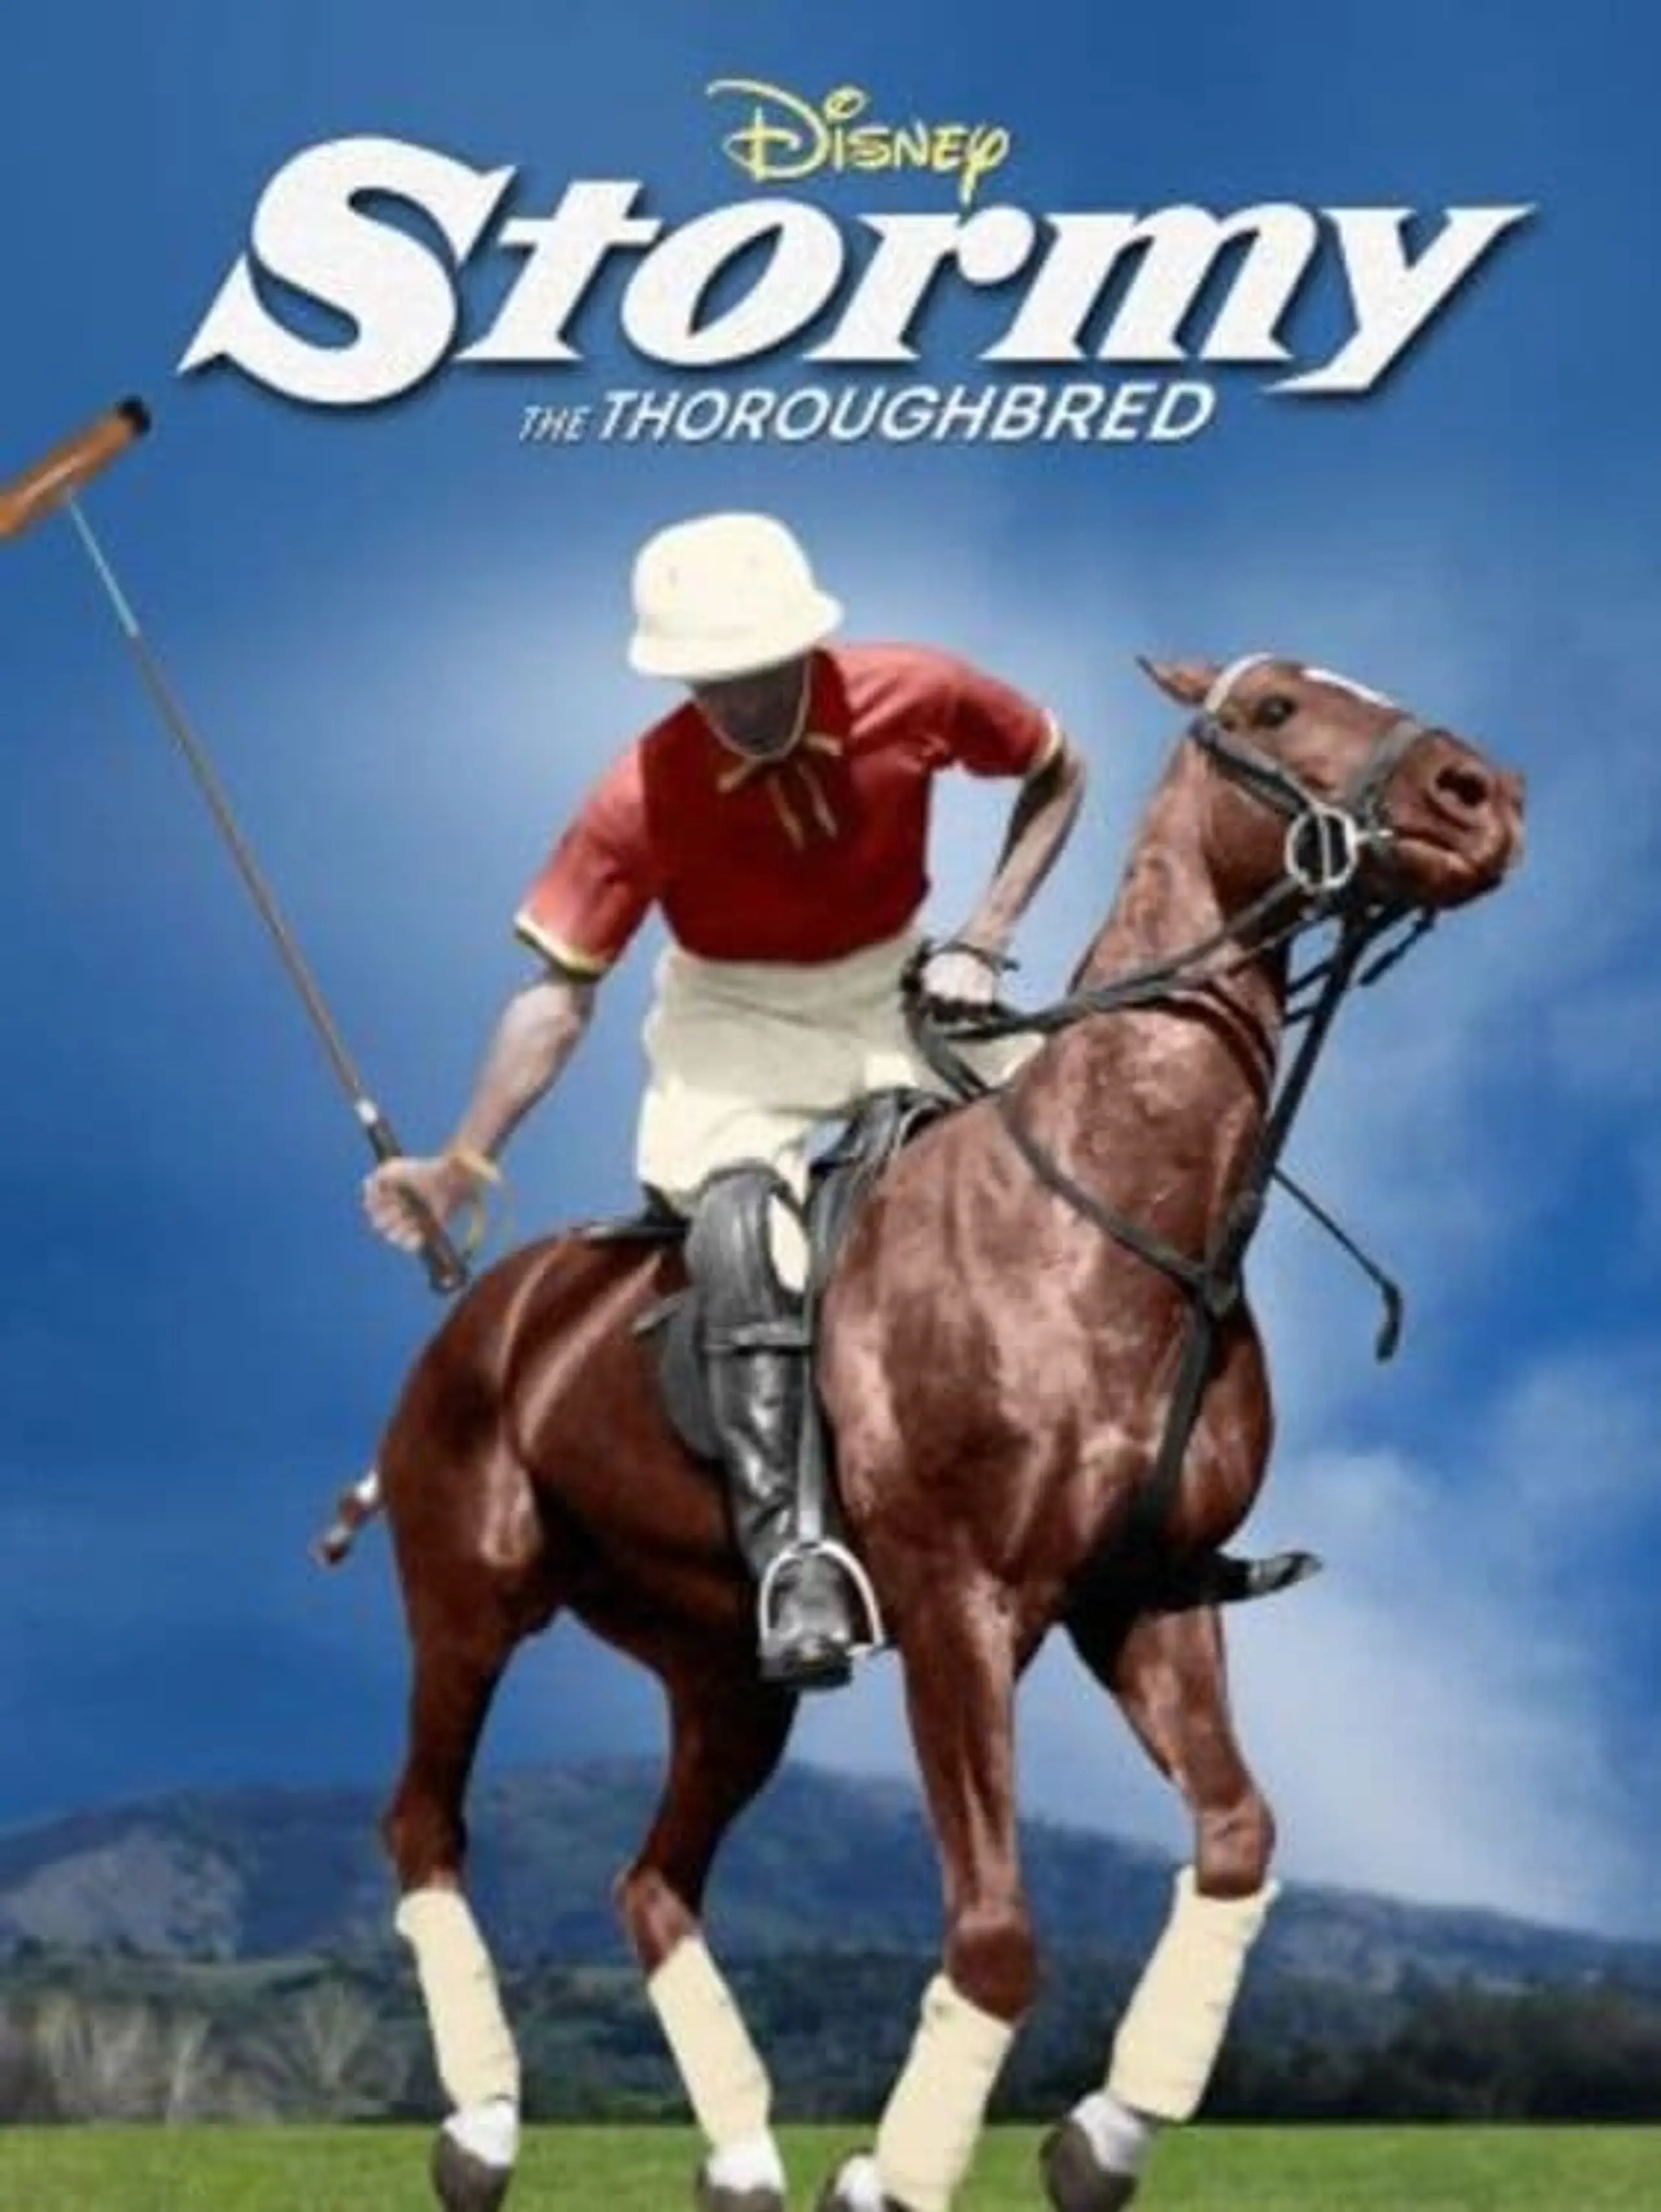 Stormy, the Thoroughbred